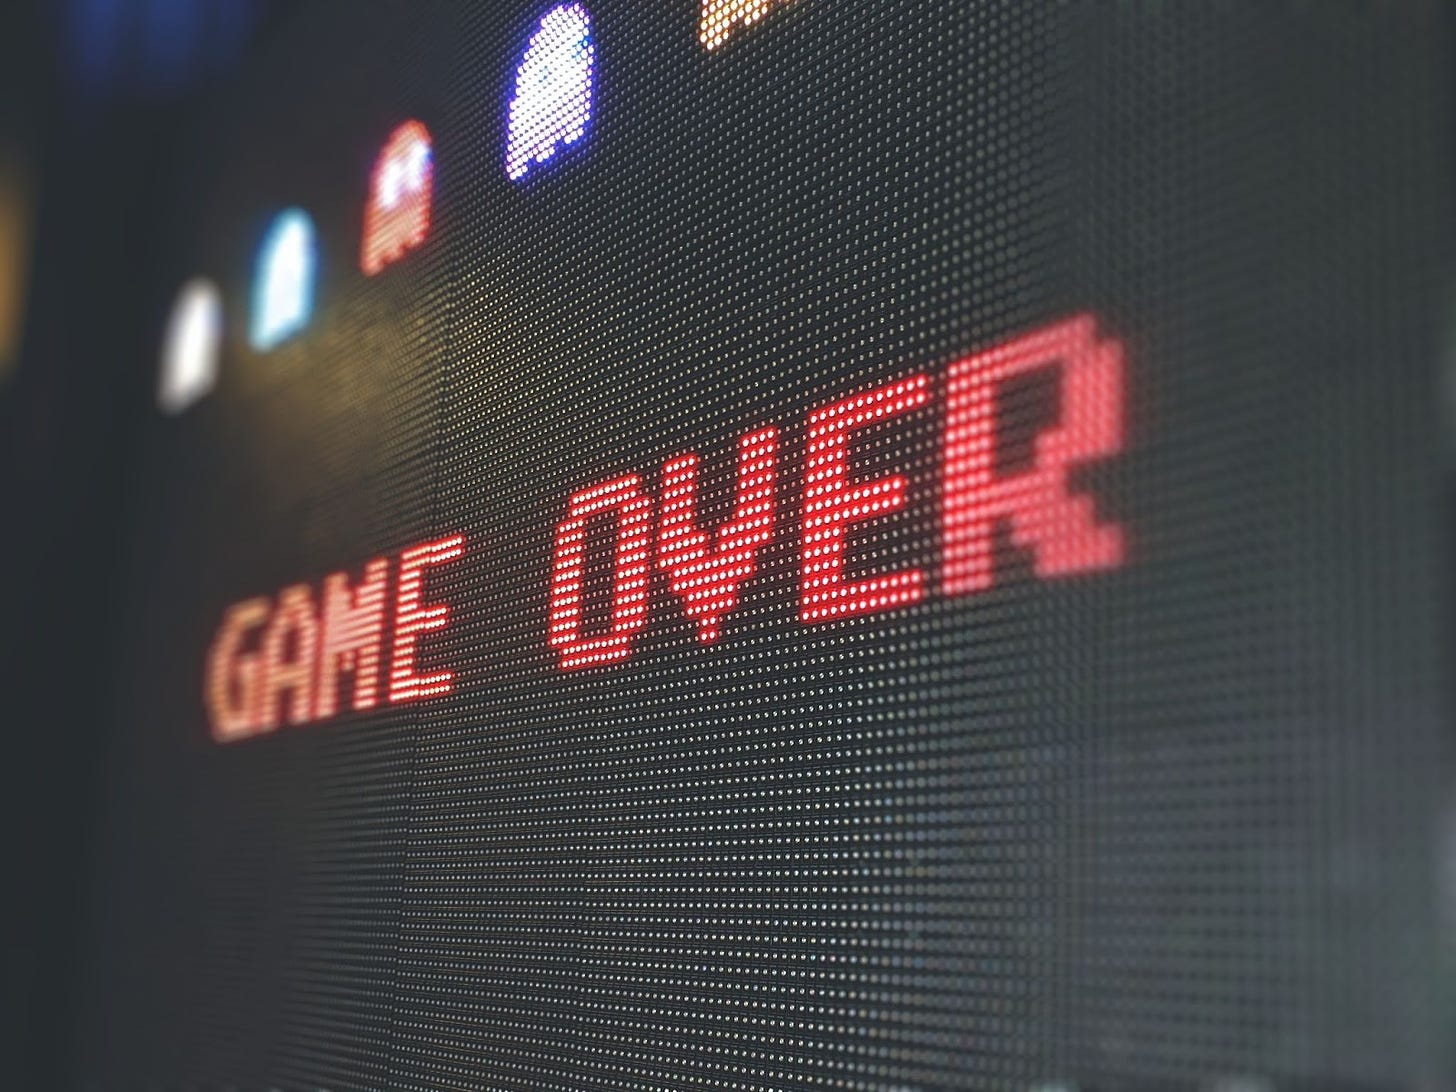 A video game “game over” screen